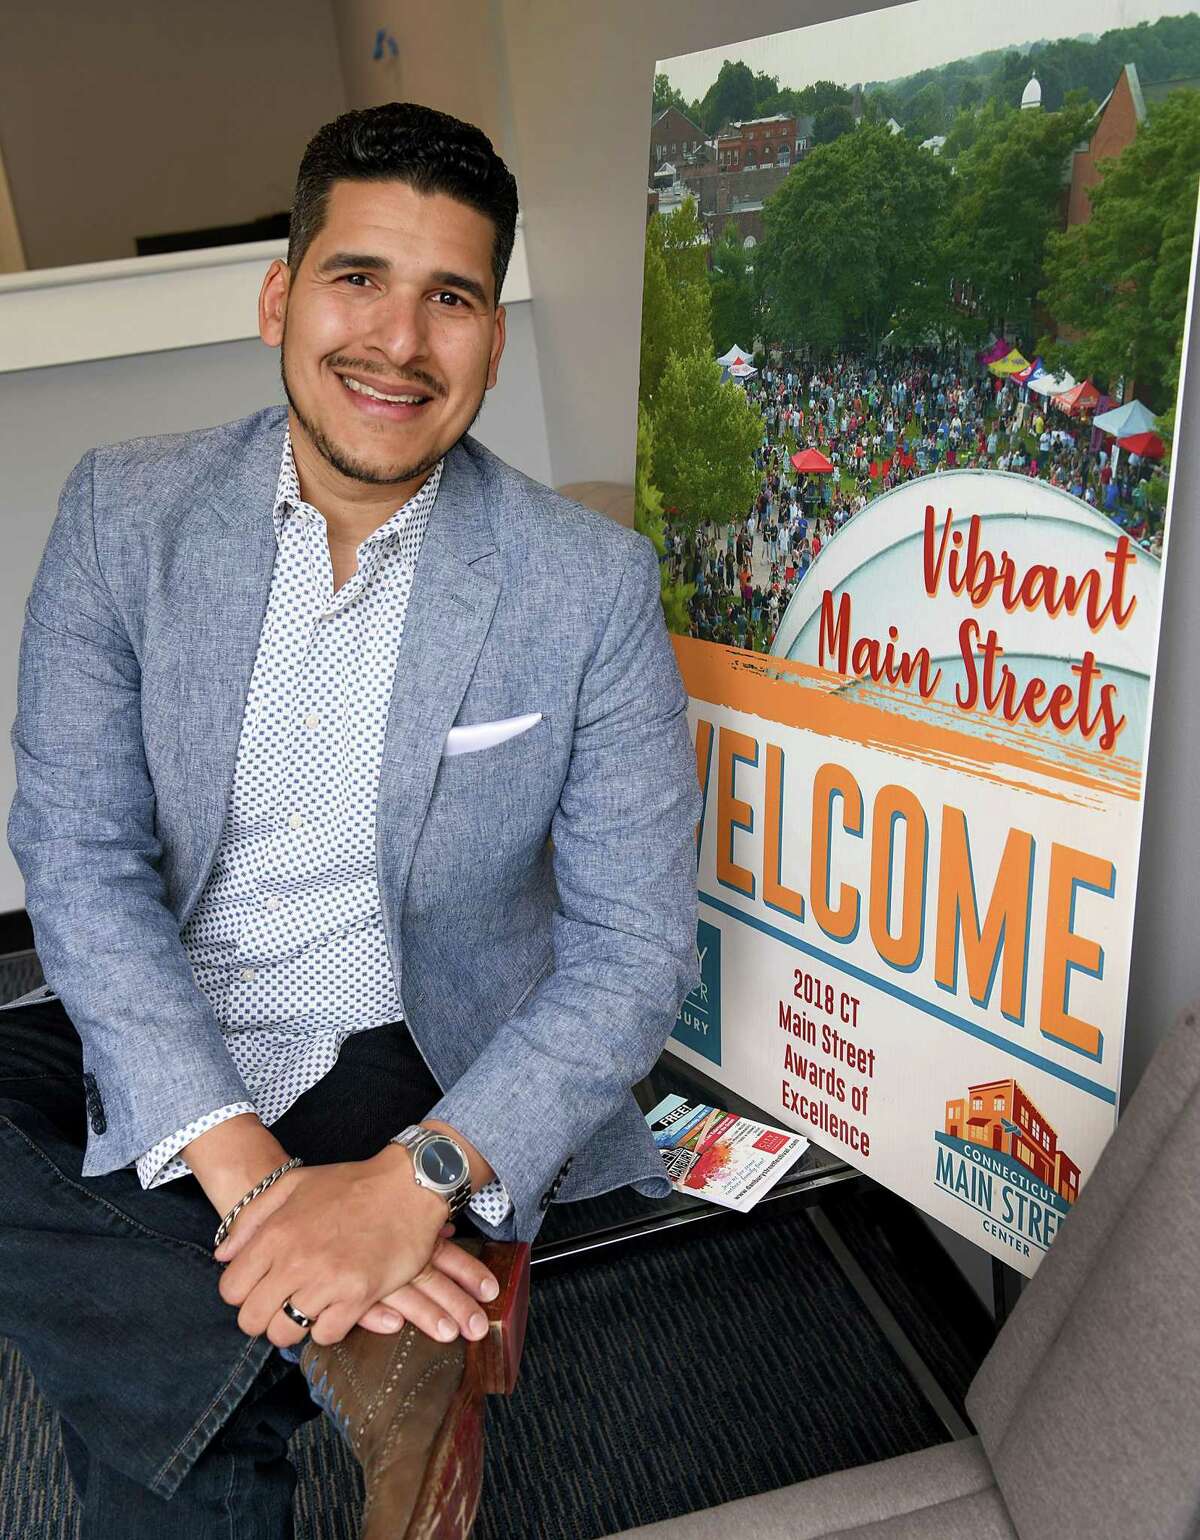 Lazaro Chavez, 38, of Danbury, is Danbury CityCenter's new leader. He's a Dominican and Cuban American who served in the Navy and is a former ballroom dance instructor. He's trying to attract more people downtown with various events and serve as a “connecting hub” for downtown businesses to the city and other groups.